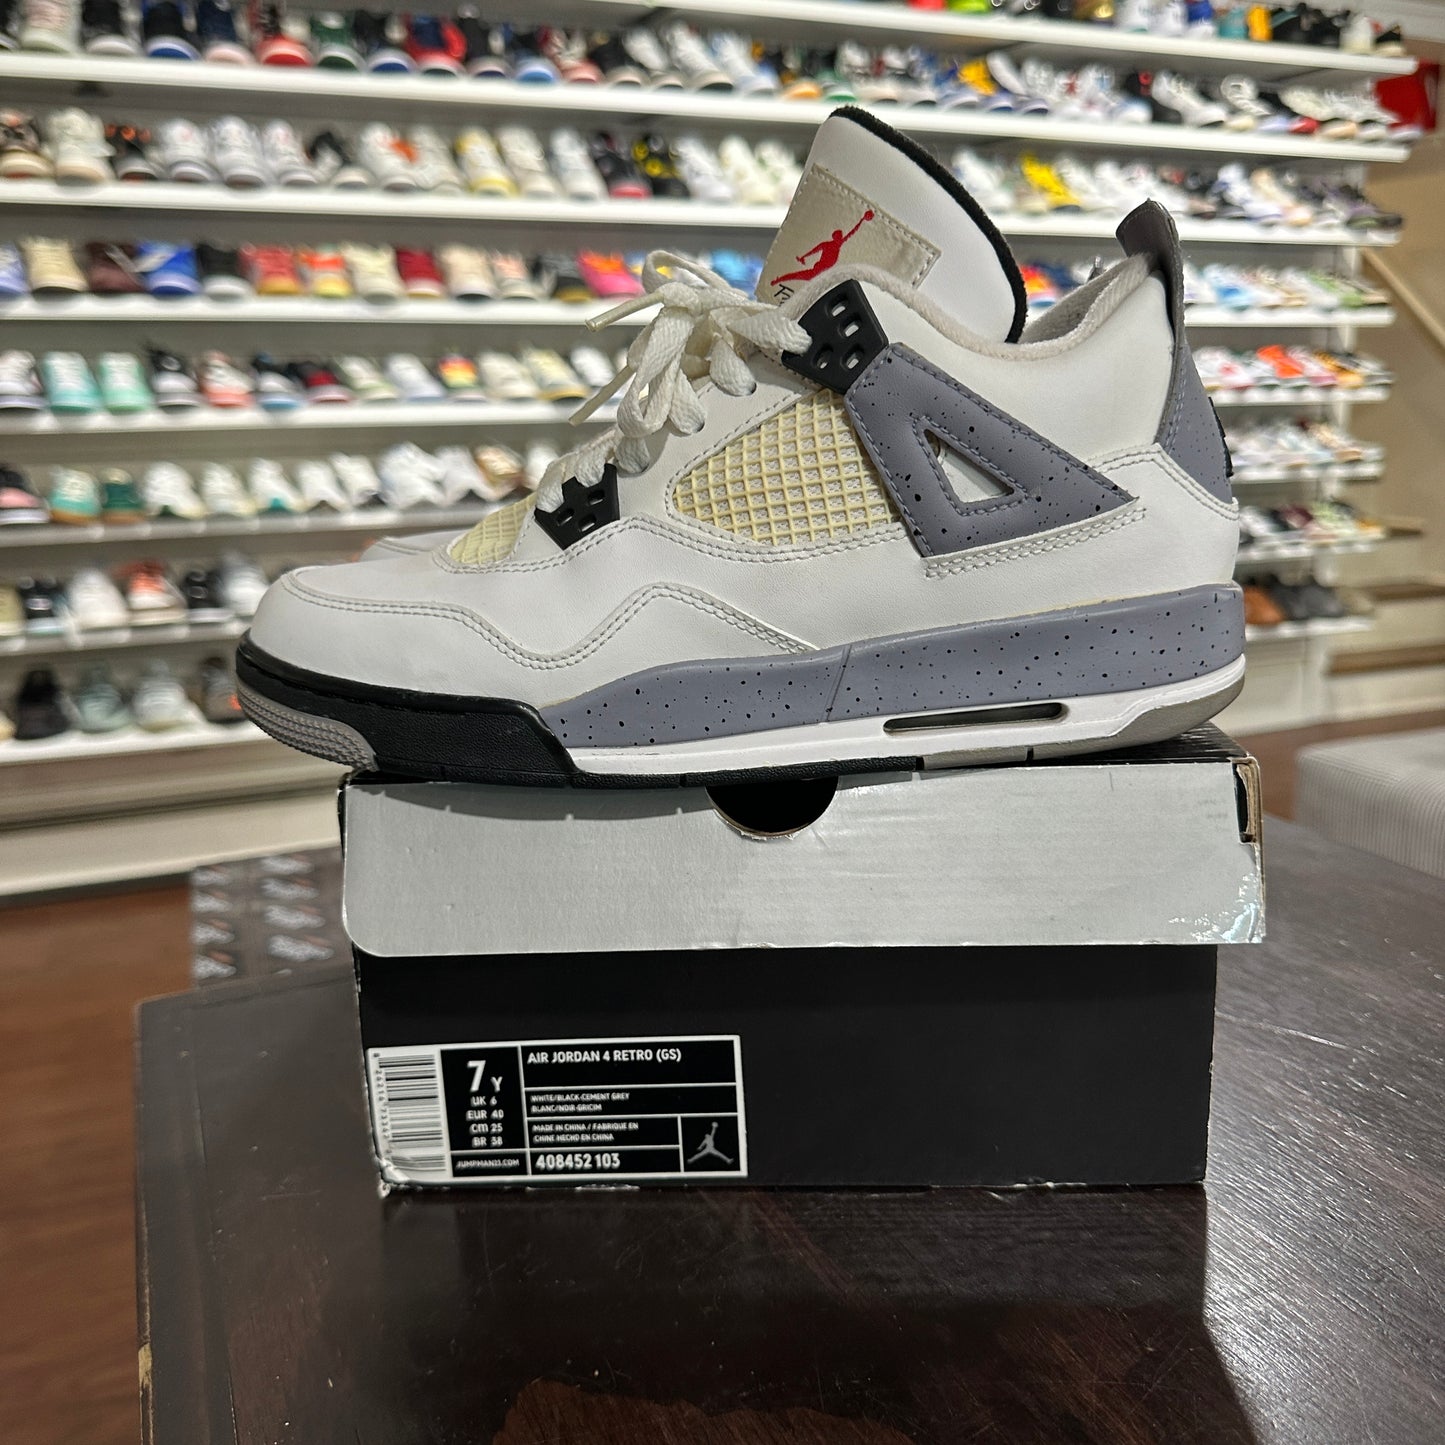 *USED* Jordan 4 White Cement (2012) (Size 7Y)